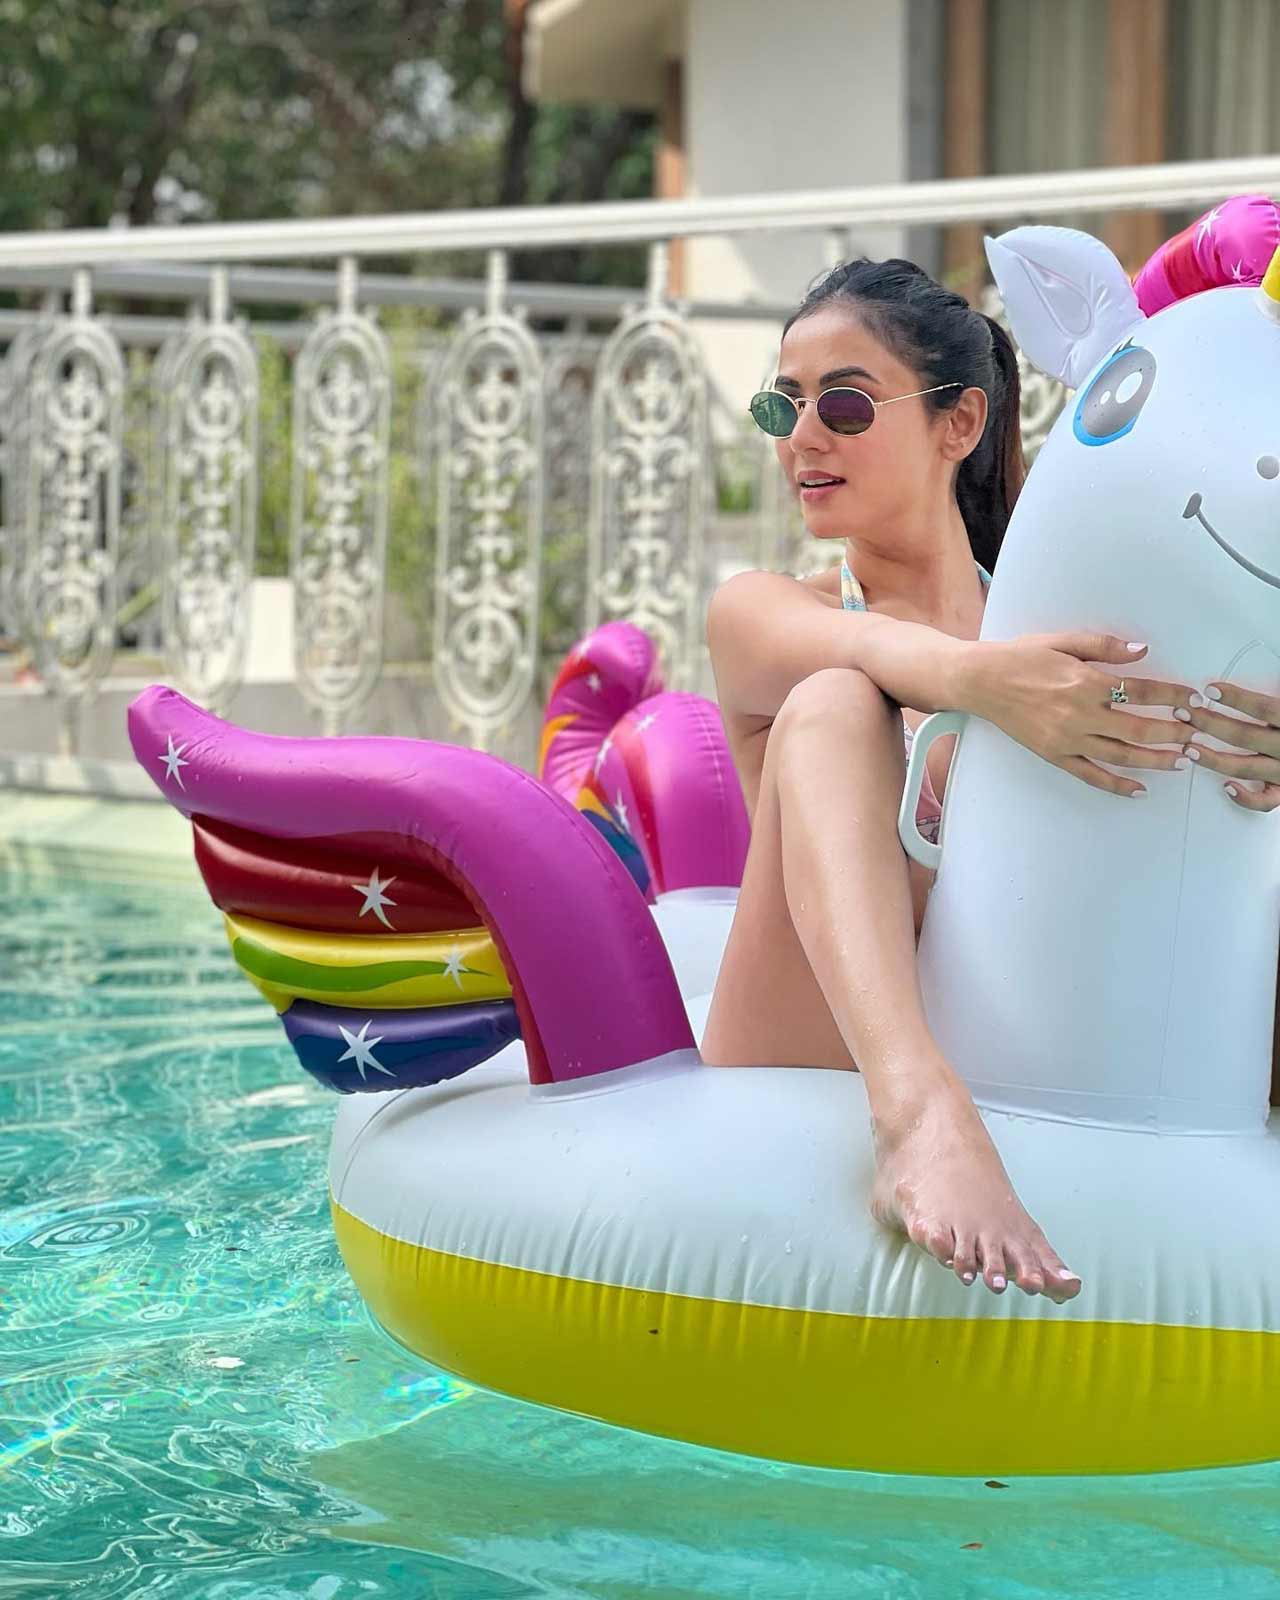 Sonal Chauhan shared a fun poolside picture, posing with a unicorn float, wishing herself on social media.